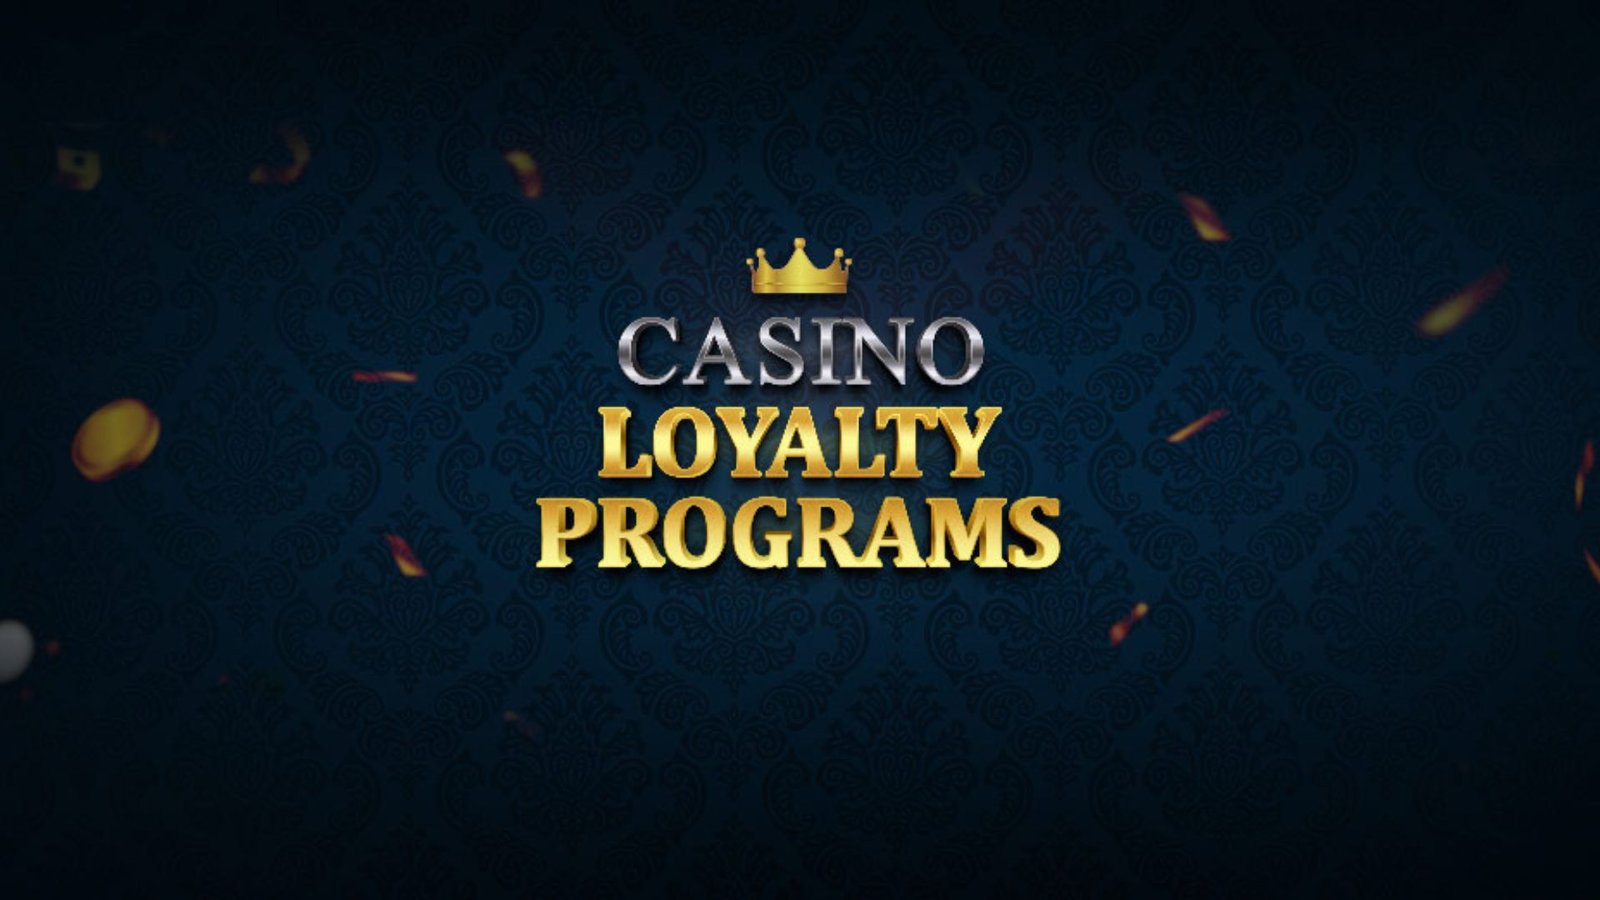 this image shows Online Casino Loyalty programs